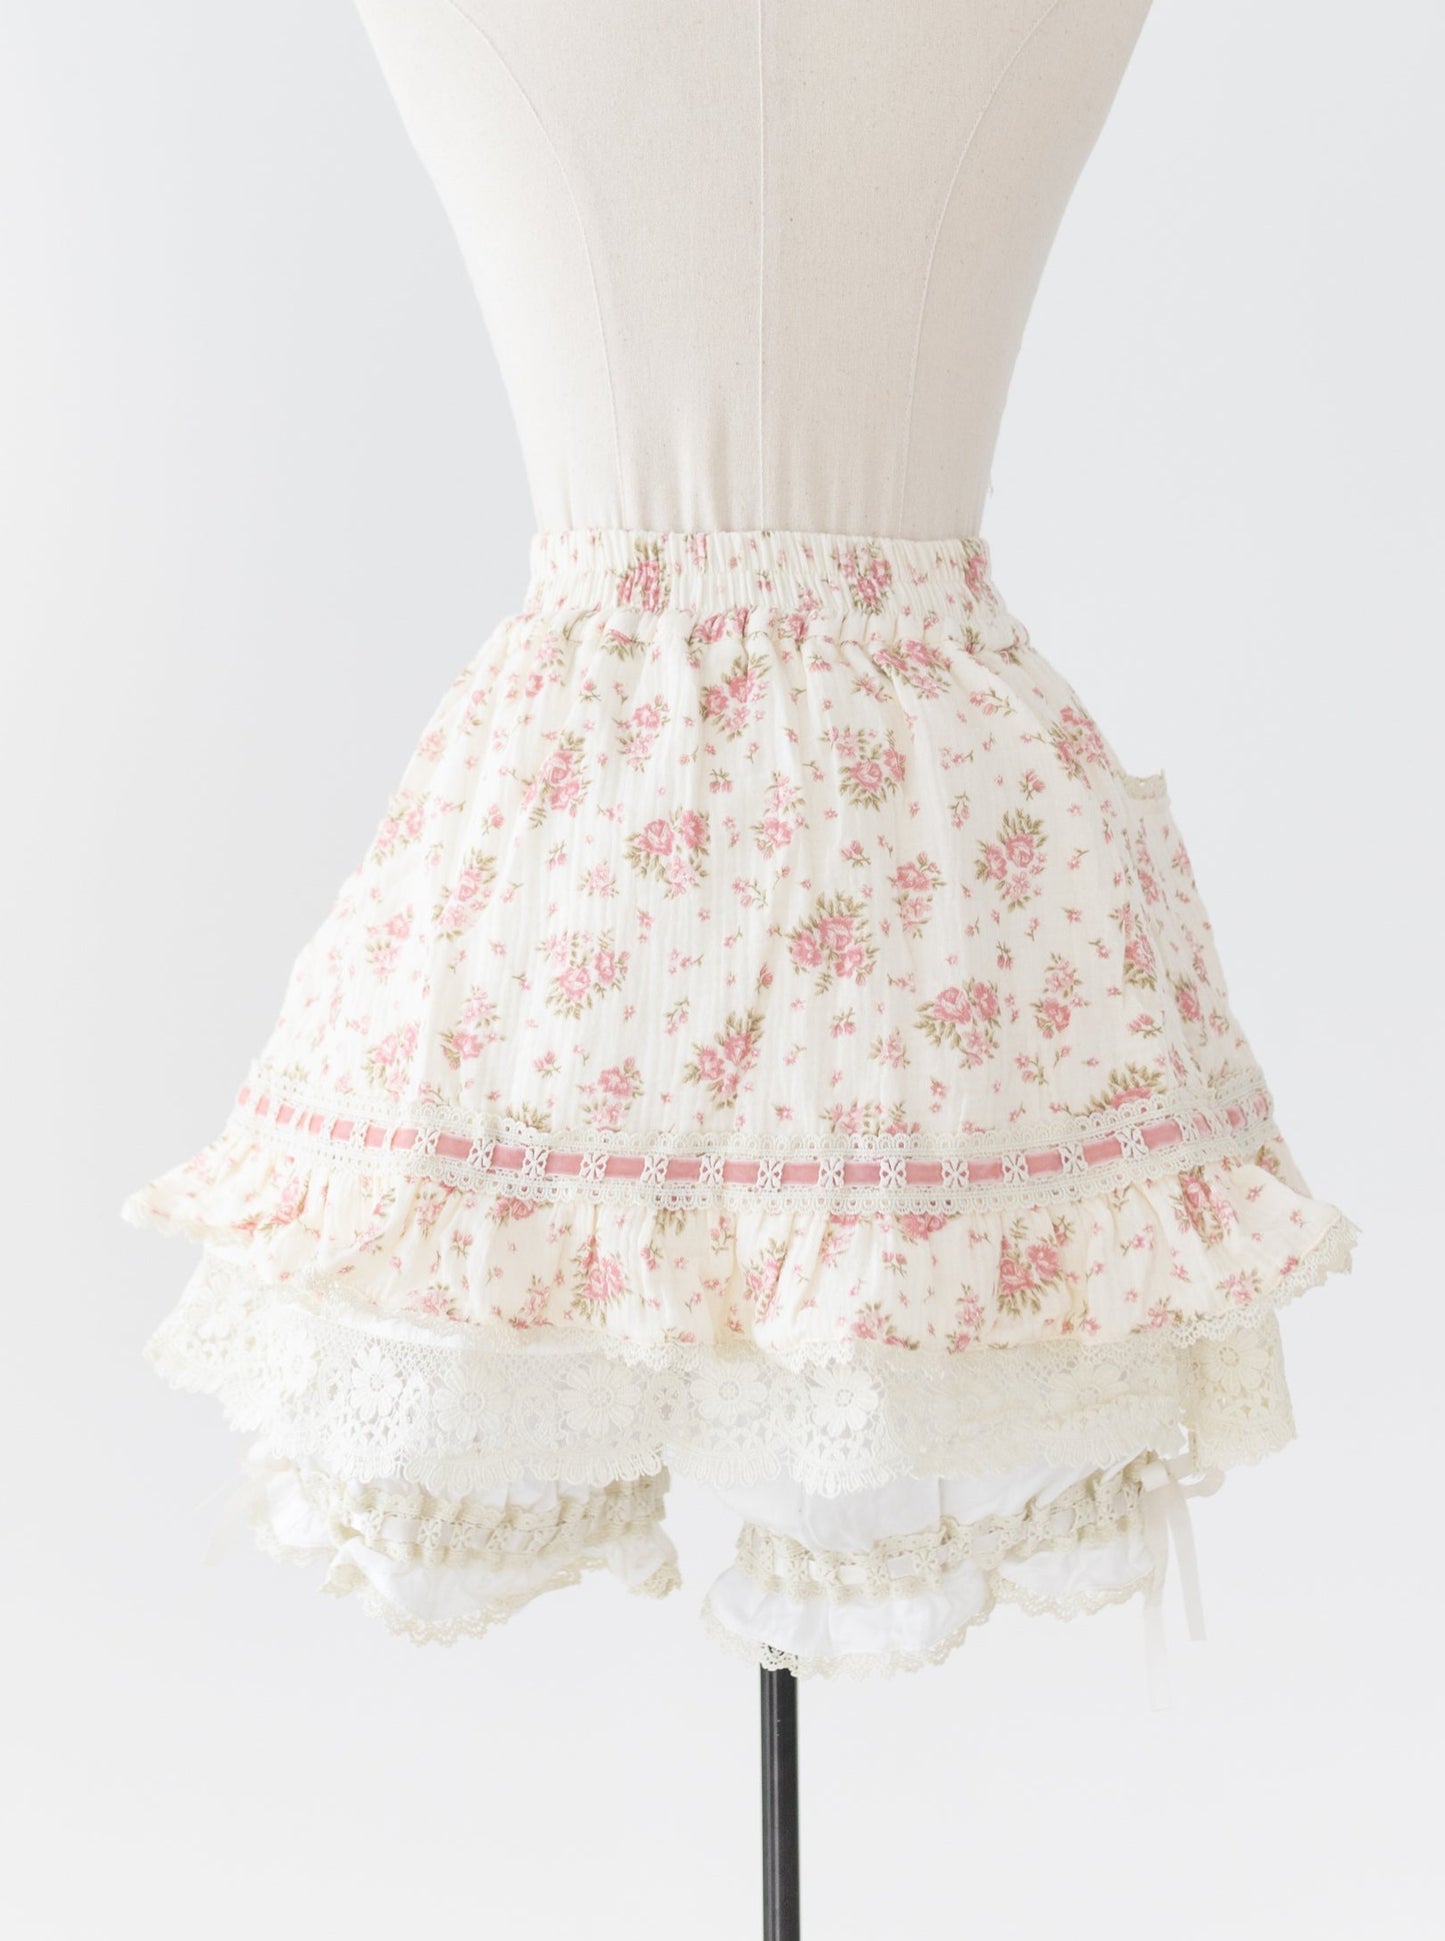 Floral skort with attached bloomers